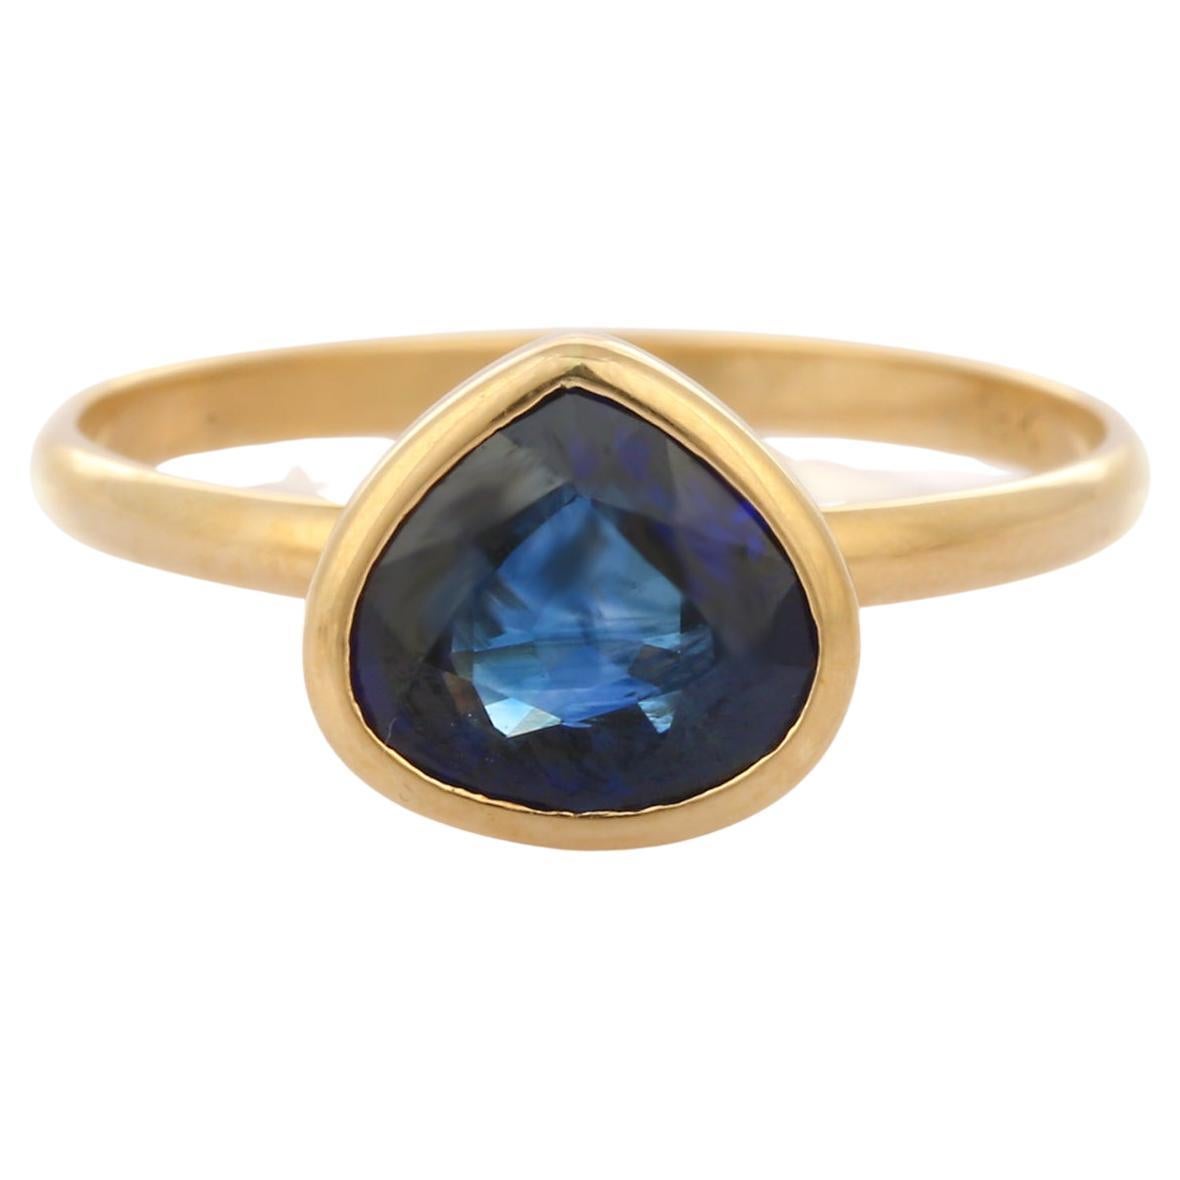 For Sale:  1.66 ct Bezel Set Pear Cut Blue Sapphire Gemstone 18K Yellow Gold Solitaire Ring